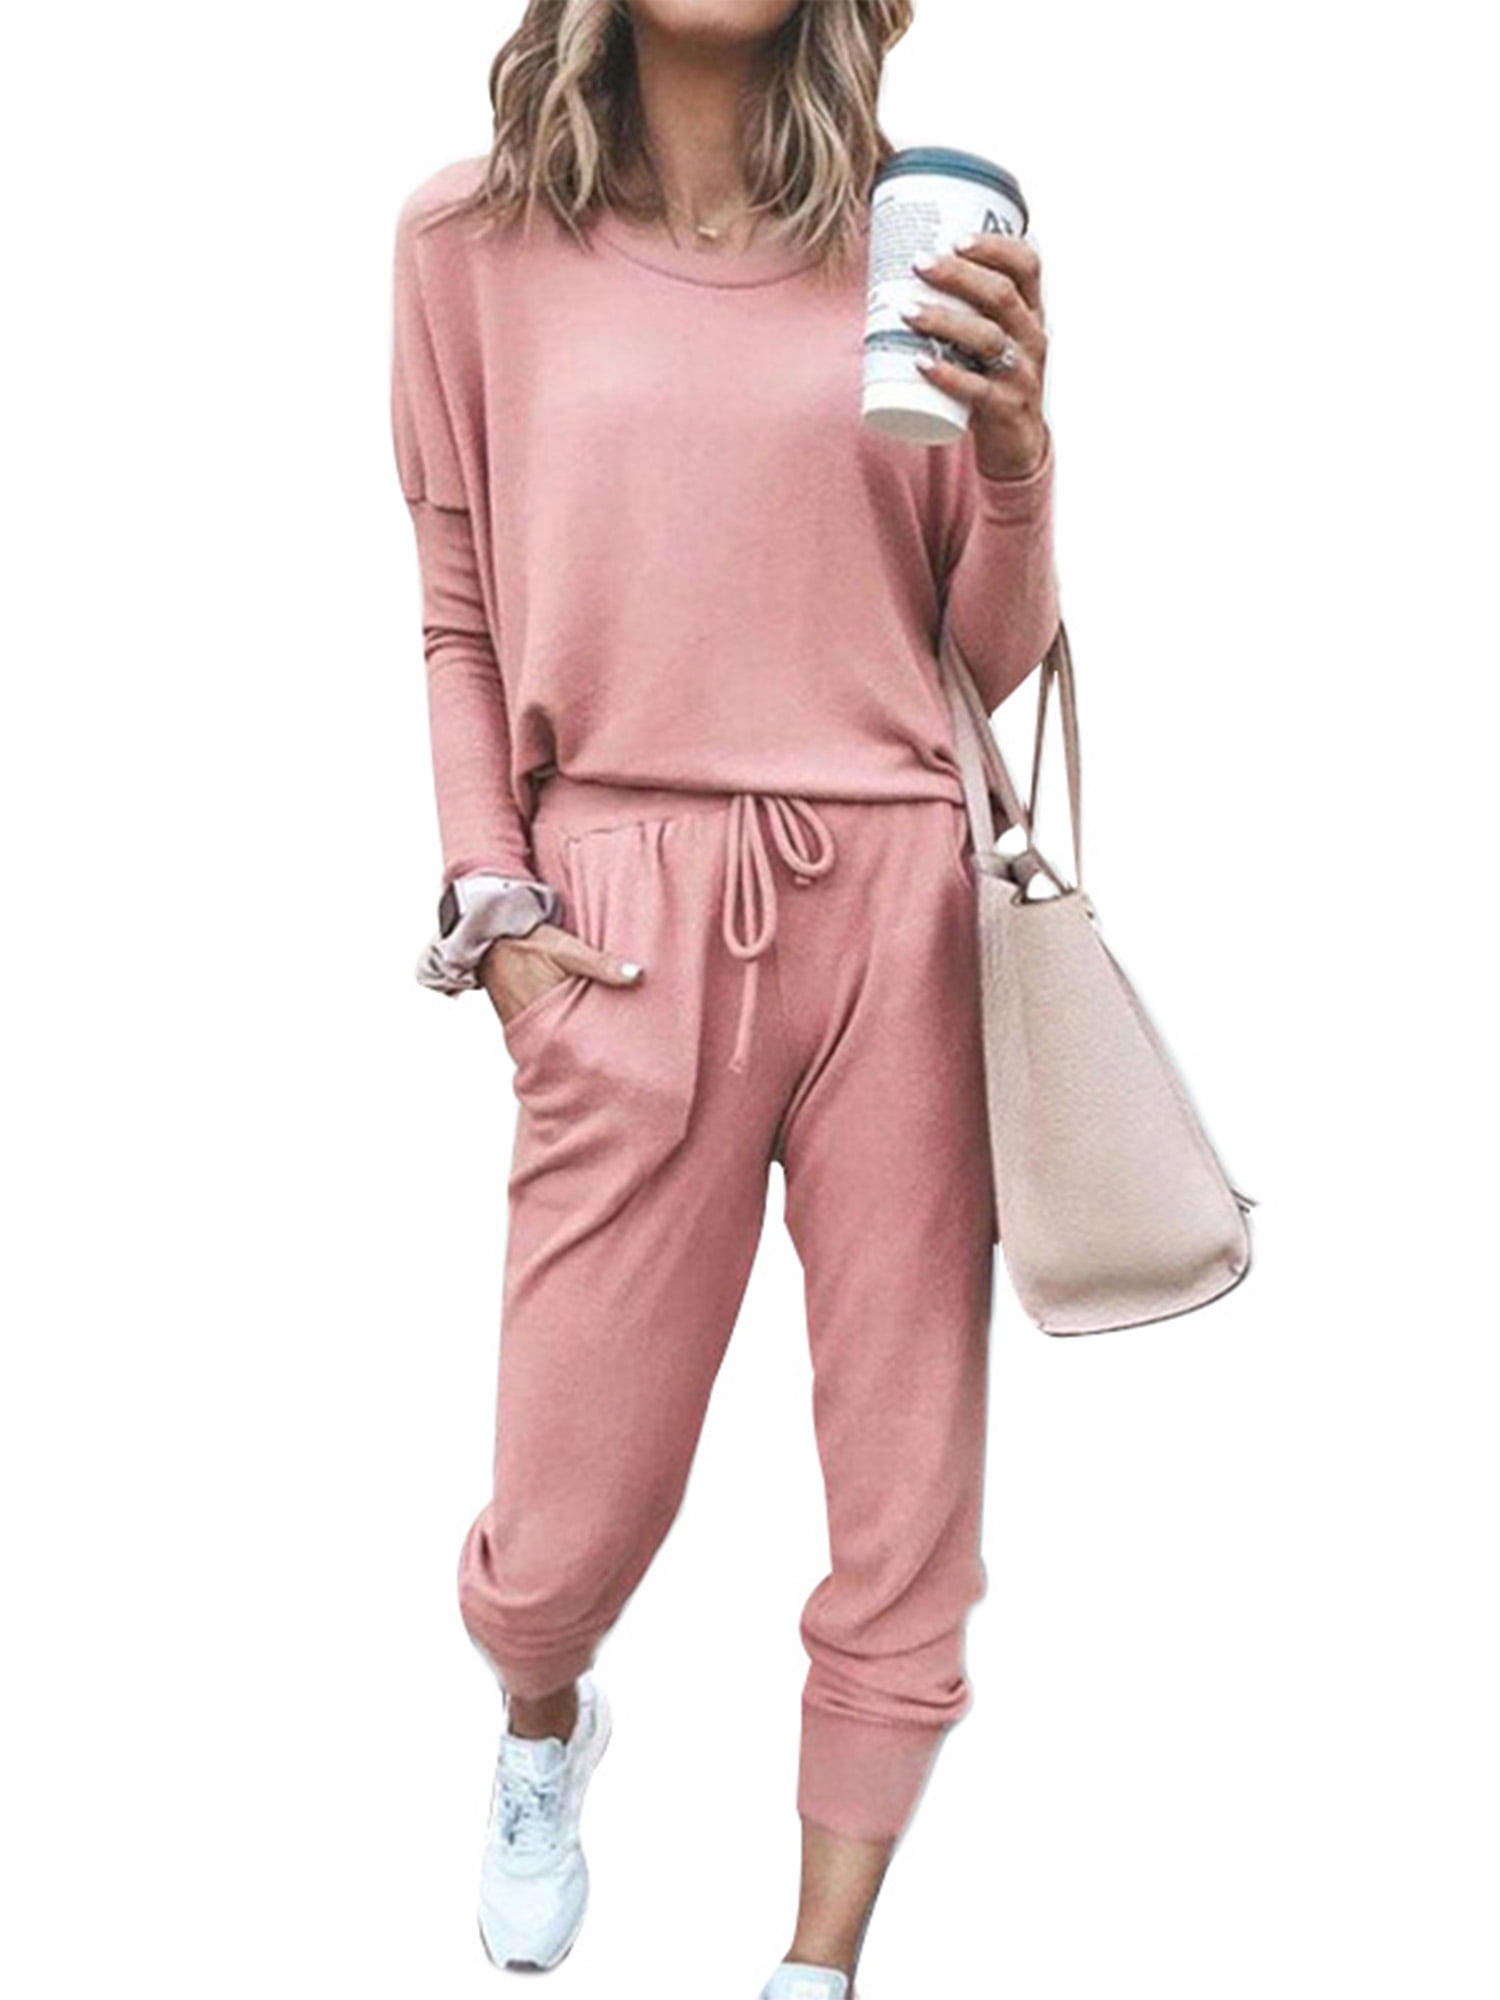 Womens 2 Piece Short Sets Solid Color Knit Pullover Sweatsuit Tunic Tops for Leggings Sweatsuit T Shirts Loose Fit